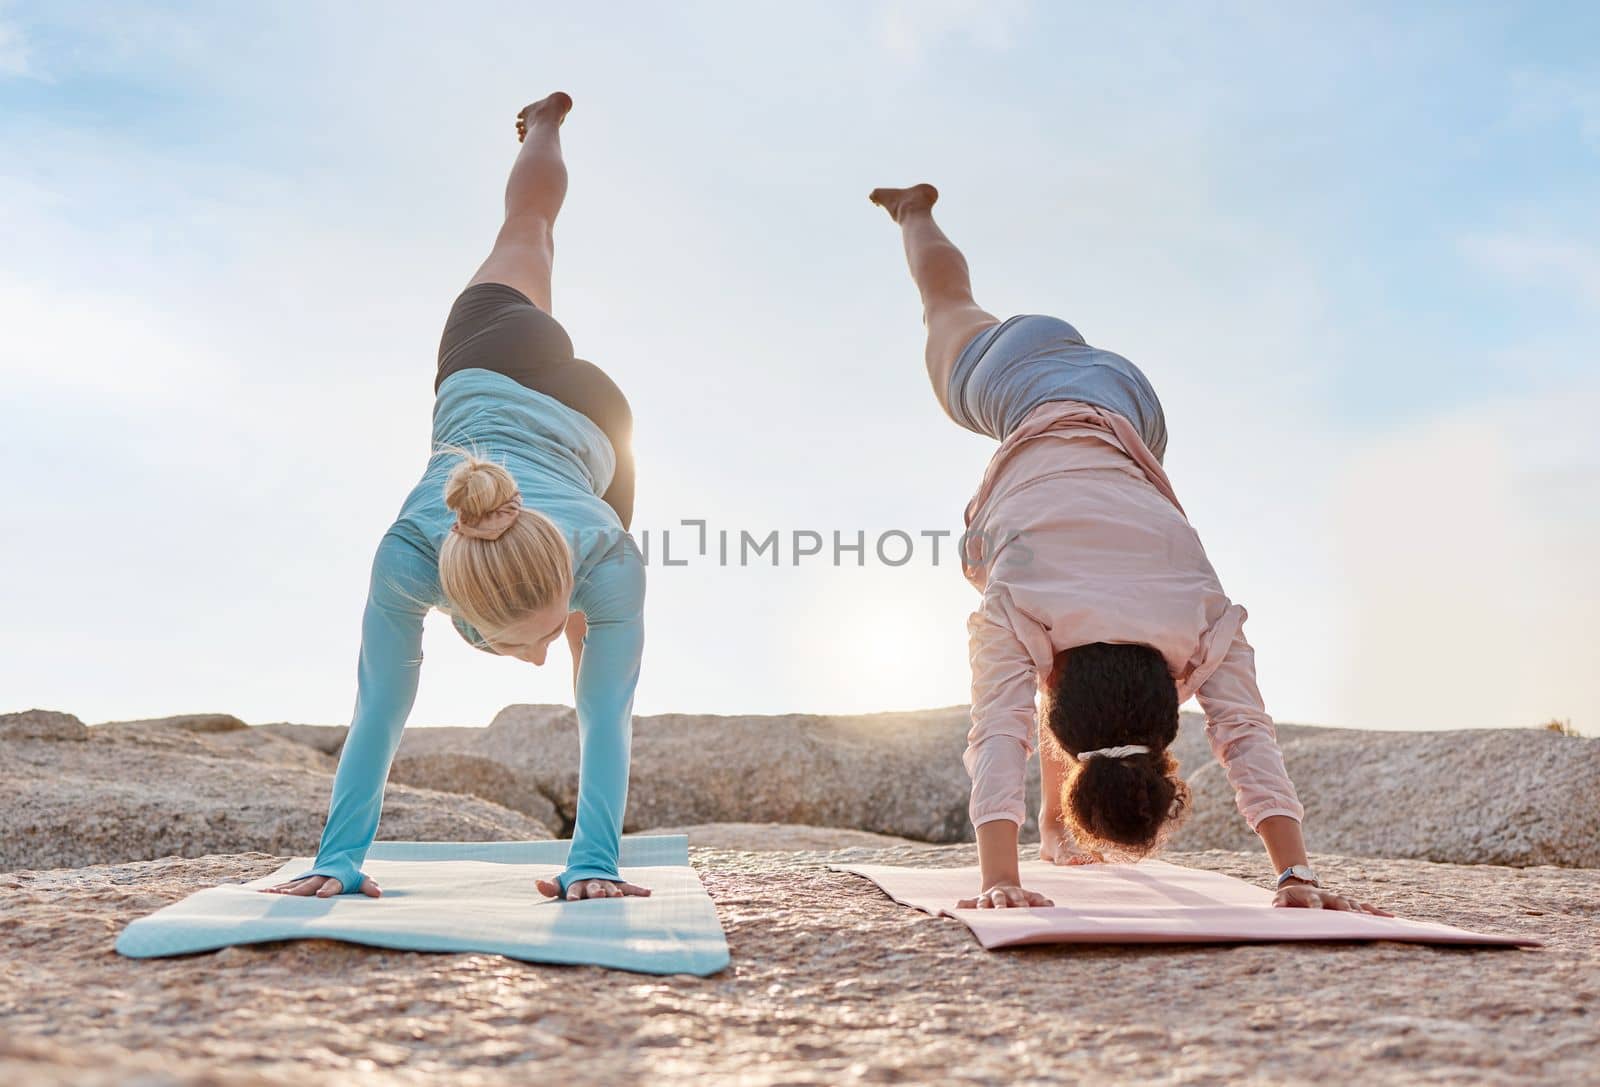 Yoga, stretching and fitness with friends on the beach together for mental health or wellness in summer. Exercise, diversity or nature with a woman yogi and friend outside for inner peace or balance.